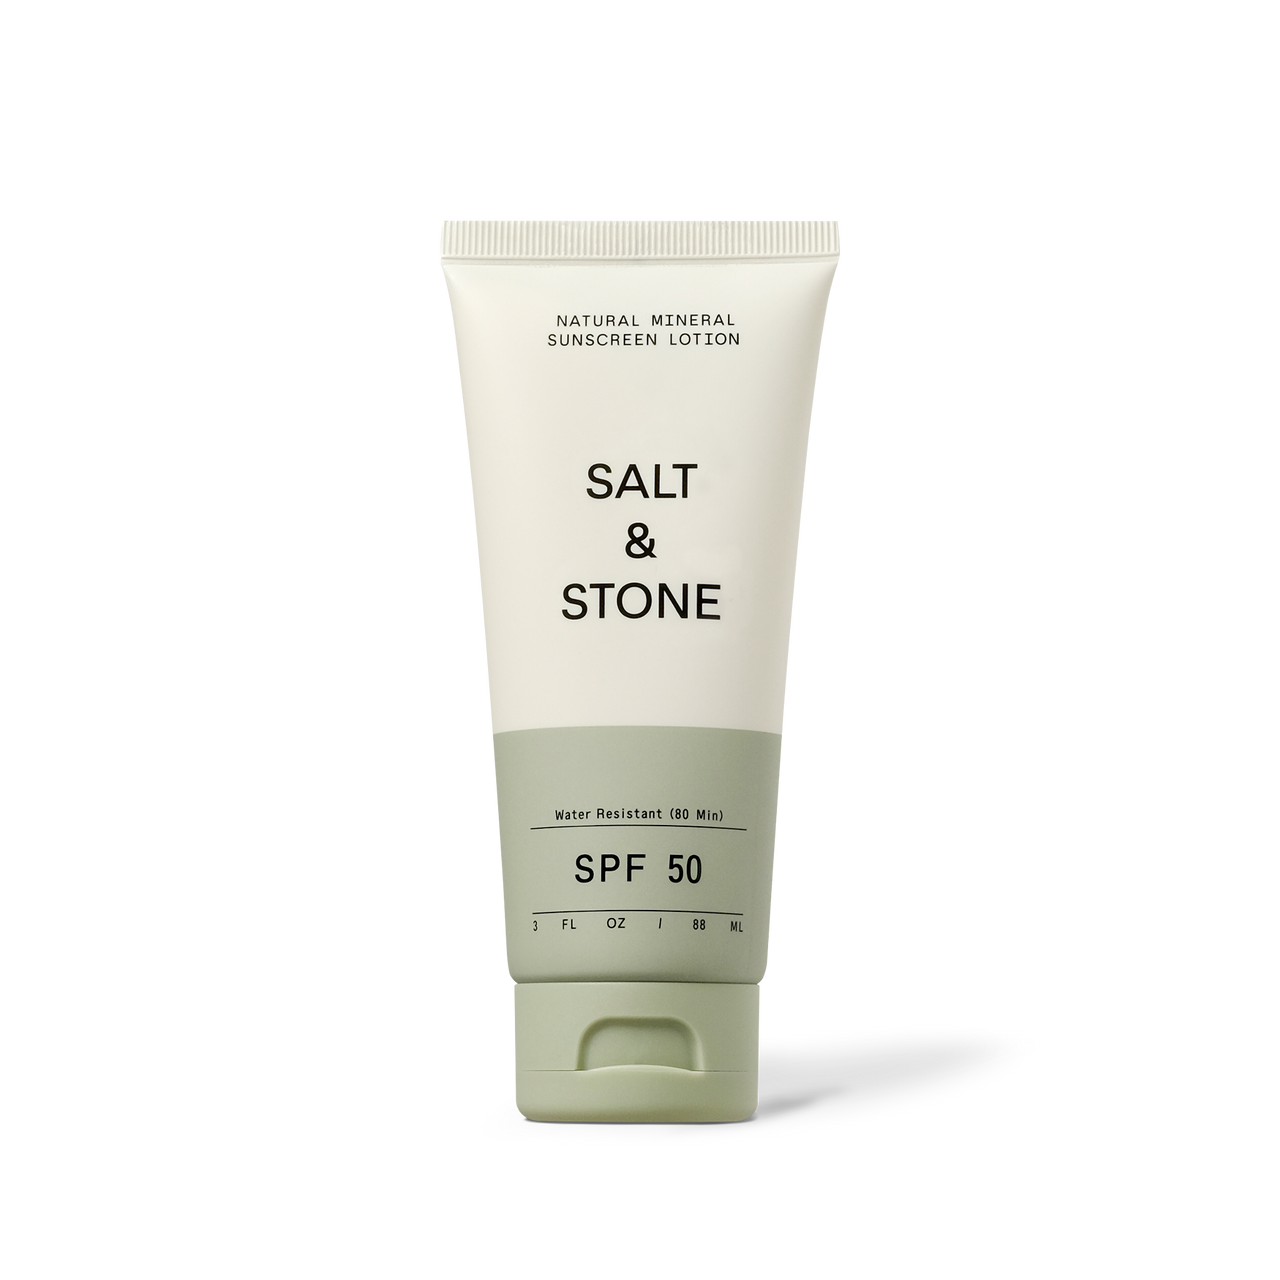 SALT AND STONE NATURAL MINERAL SUNSCREEN - SPF 50